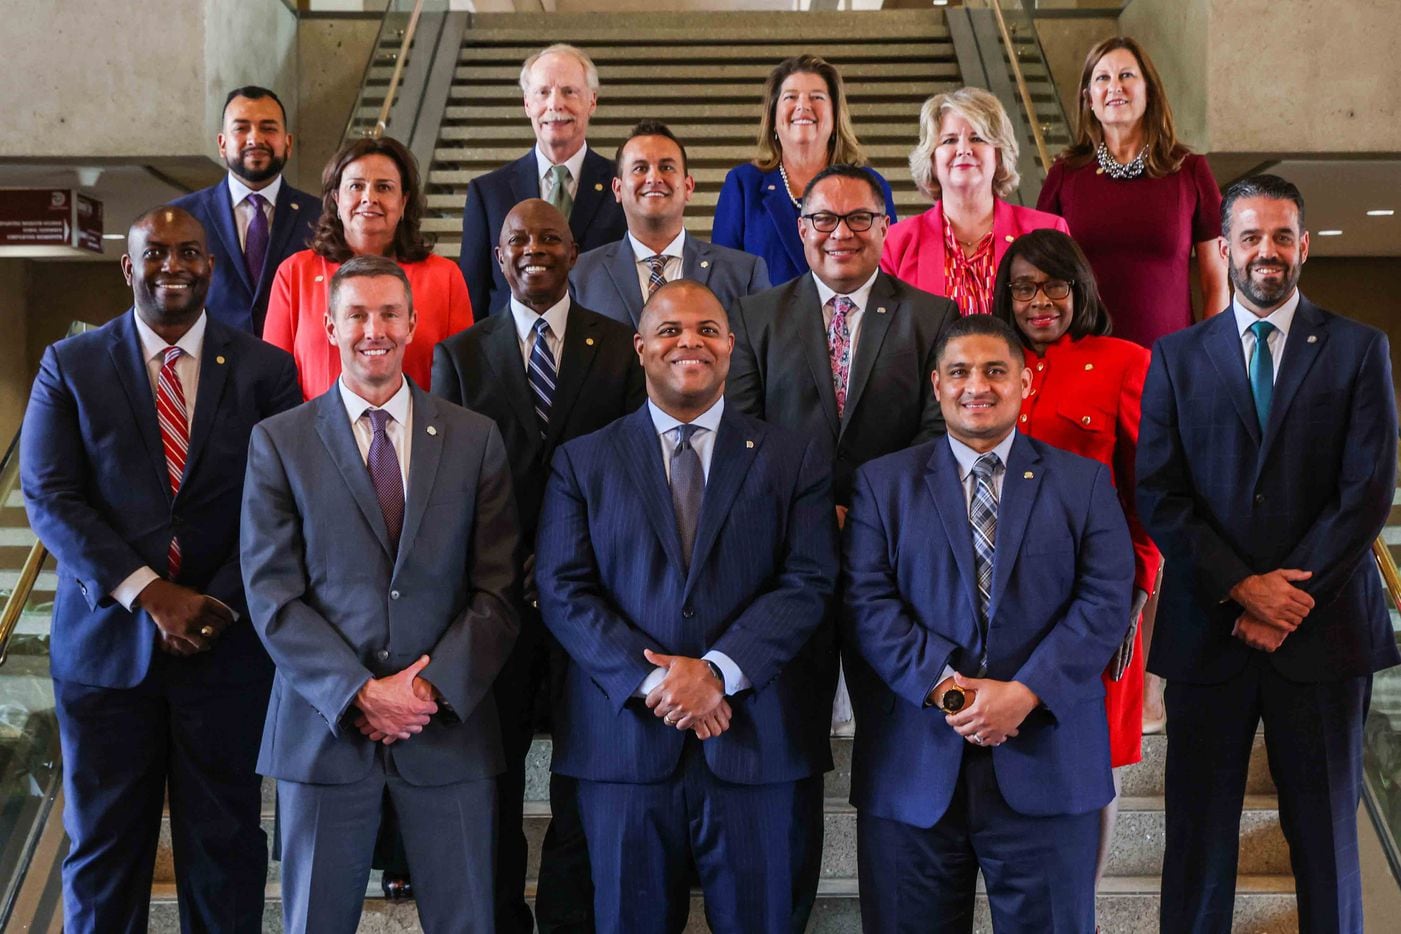 Recently elected Dallas City Council members pose together with Mayor Eric Johnson at the City Hall in Dallas on Monday, June 14, 2021, after their Inauguration ceremony. (Lola Gomez/The Dallas Morning News)